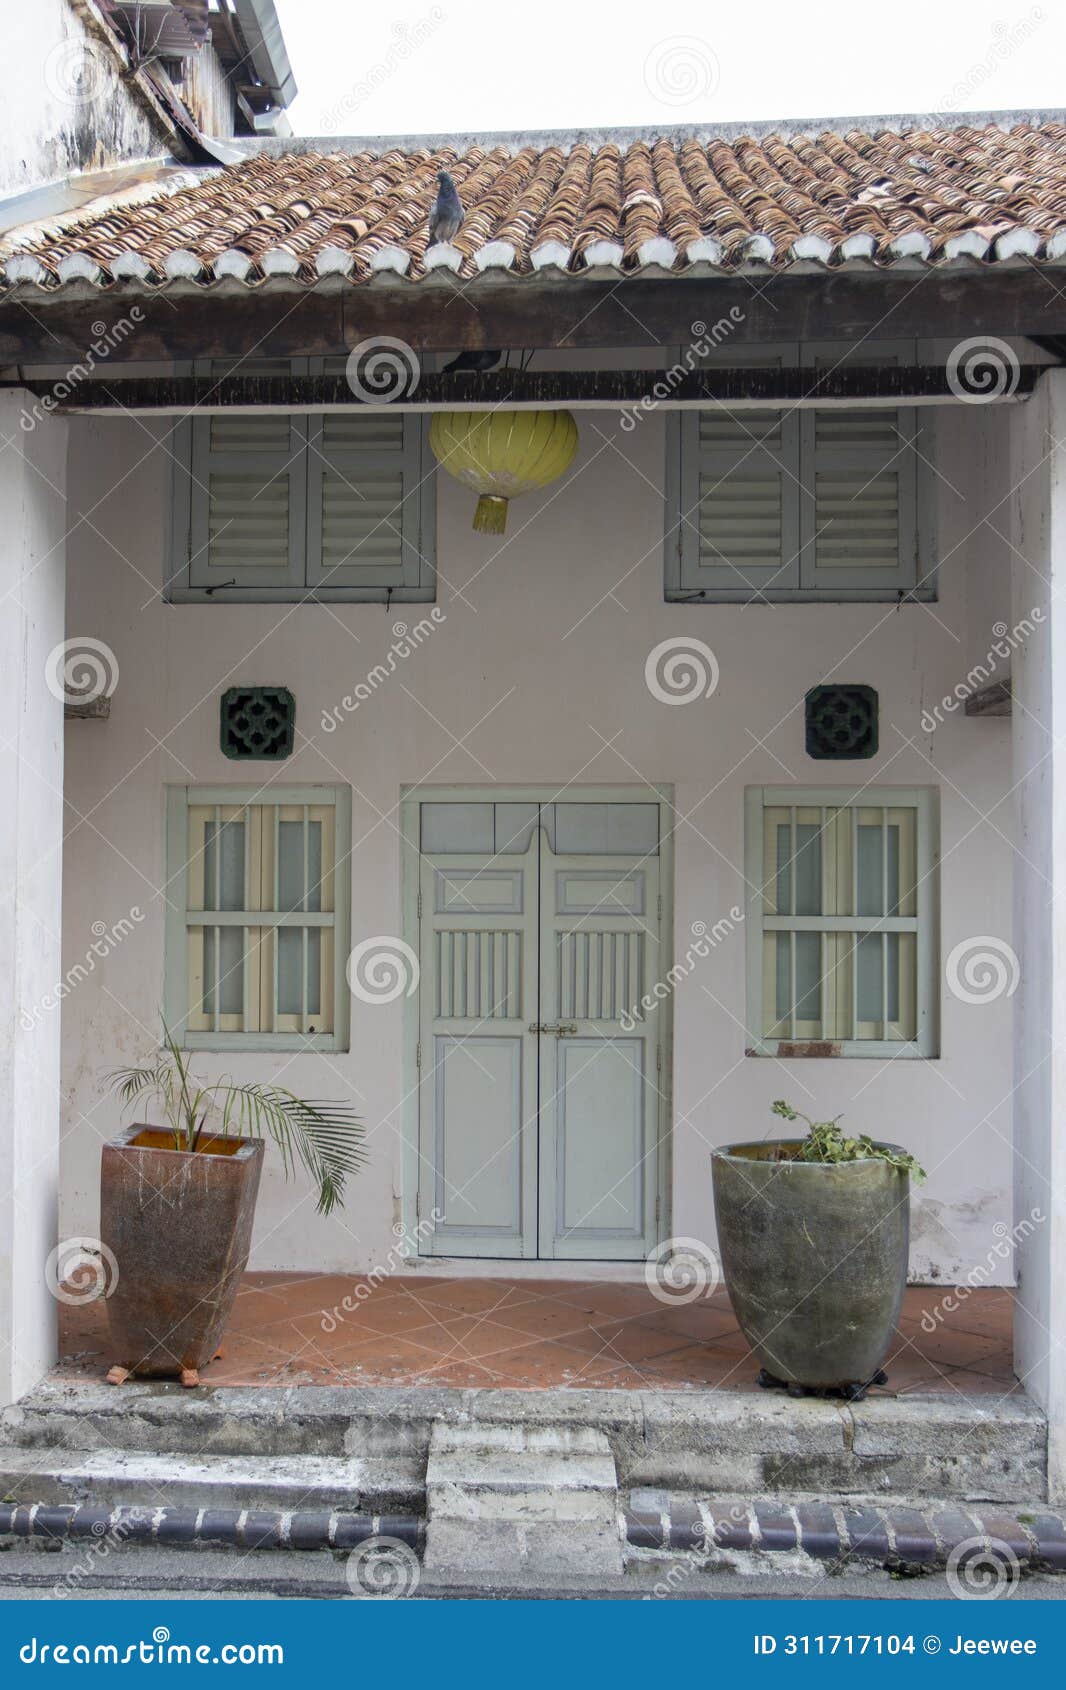 chinese merchant house in the old disrict of george town, penang, malaysia